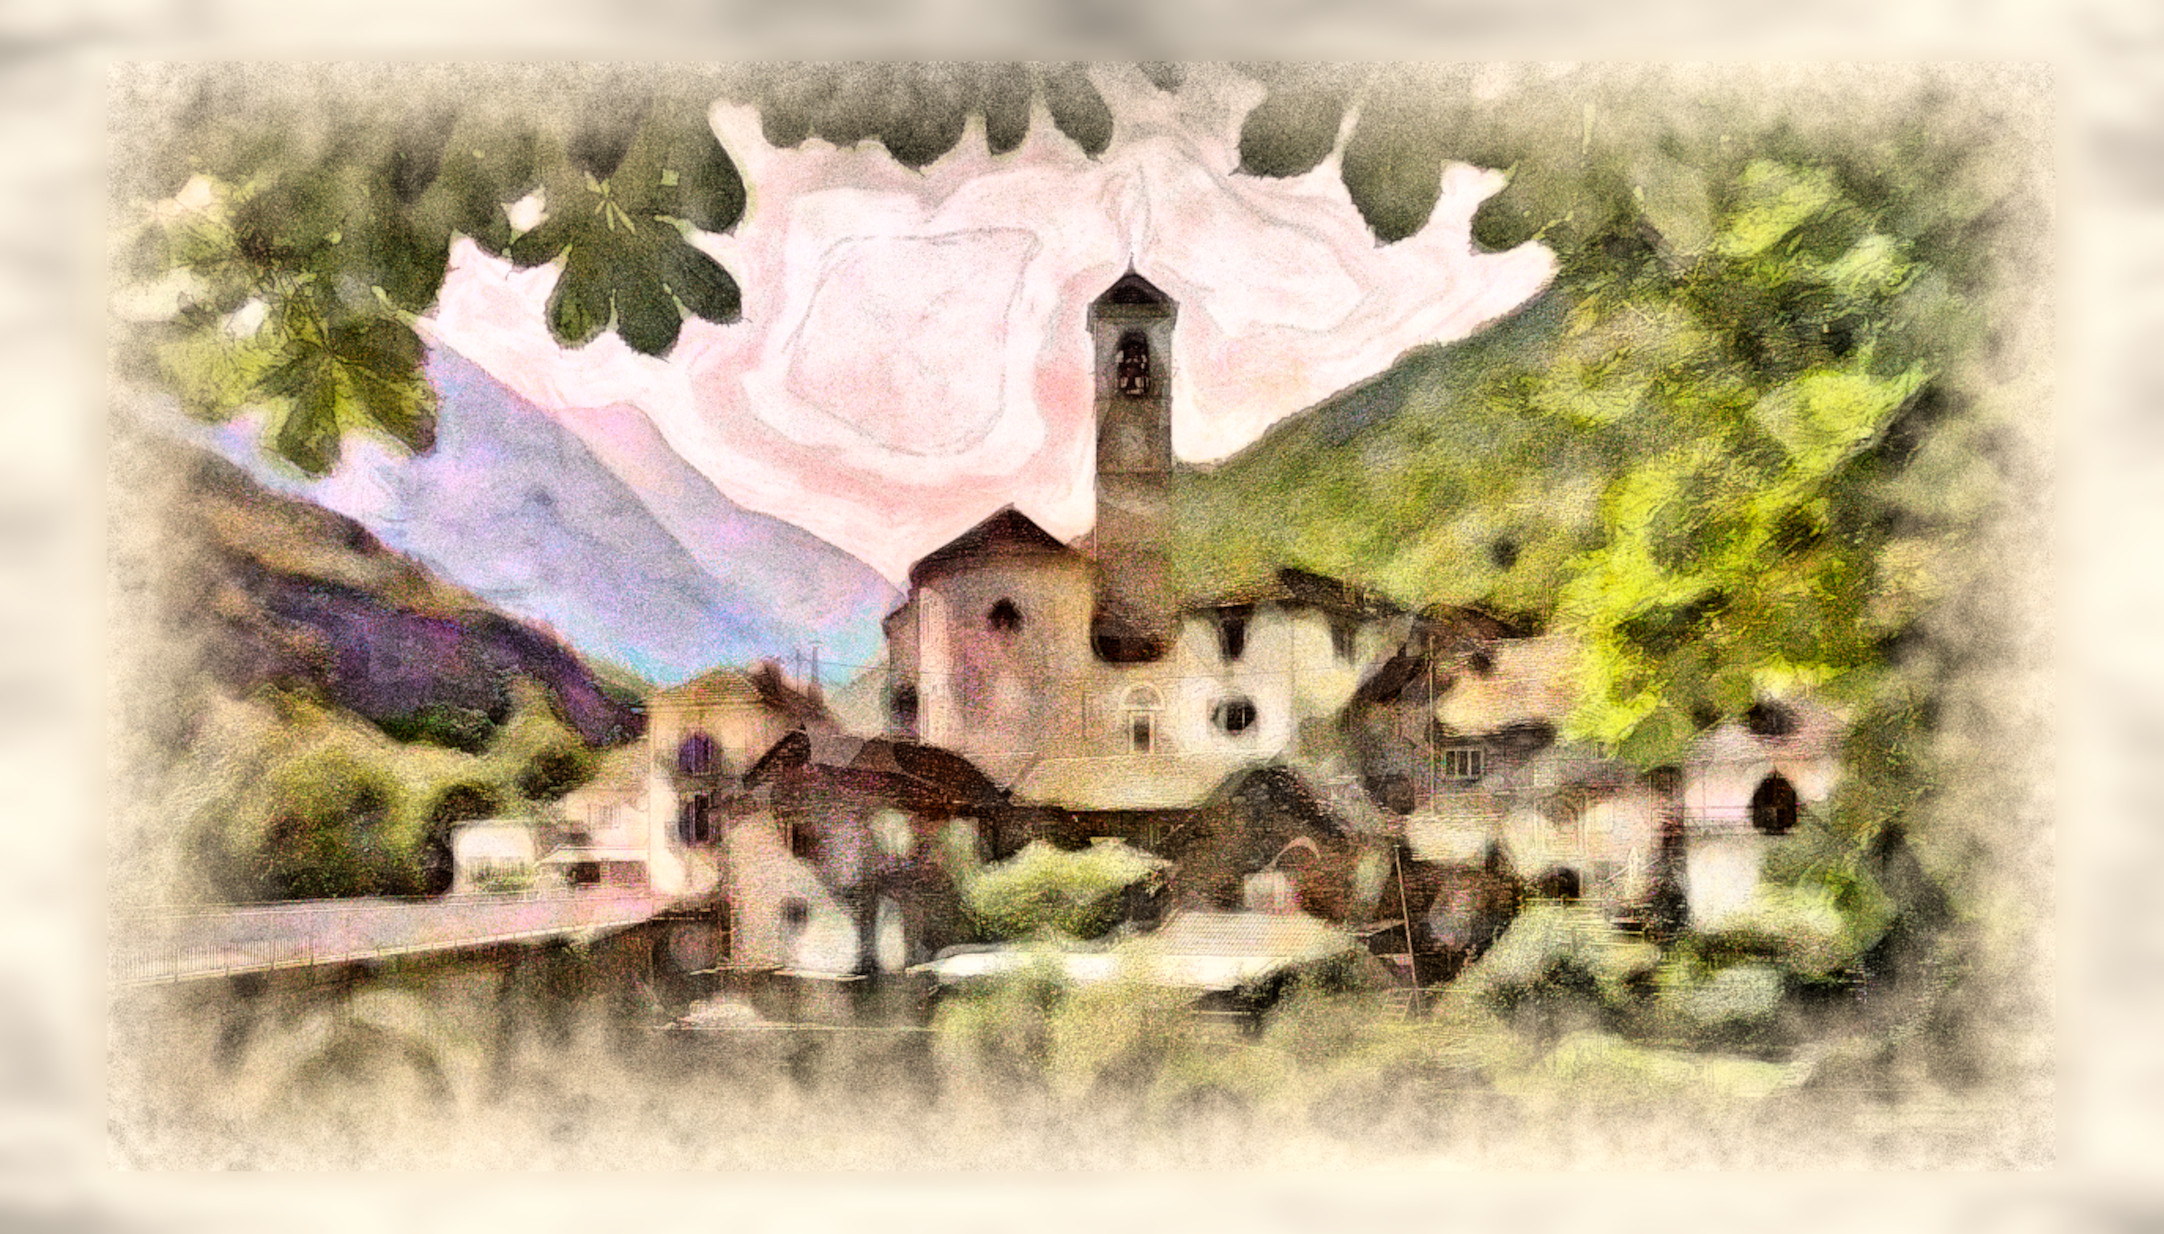 2023-10-02 18-46-57 mountain-village-3543253 with a Watercolor Pastels Effect 2023 (12.0,75.0,32.0,50.0,14.0,8.0,100.0,False,0).jpg